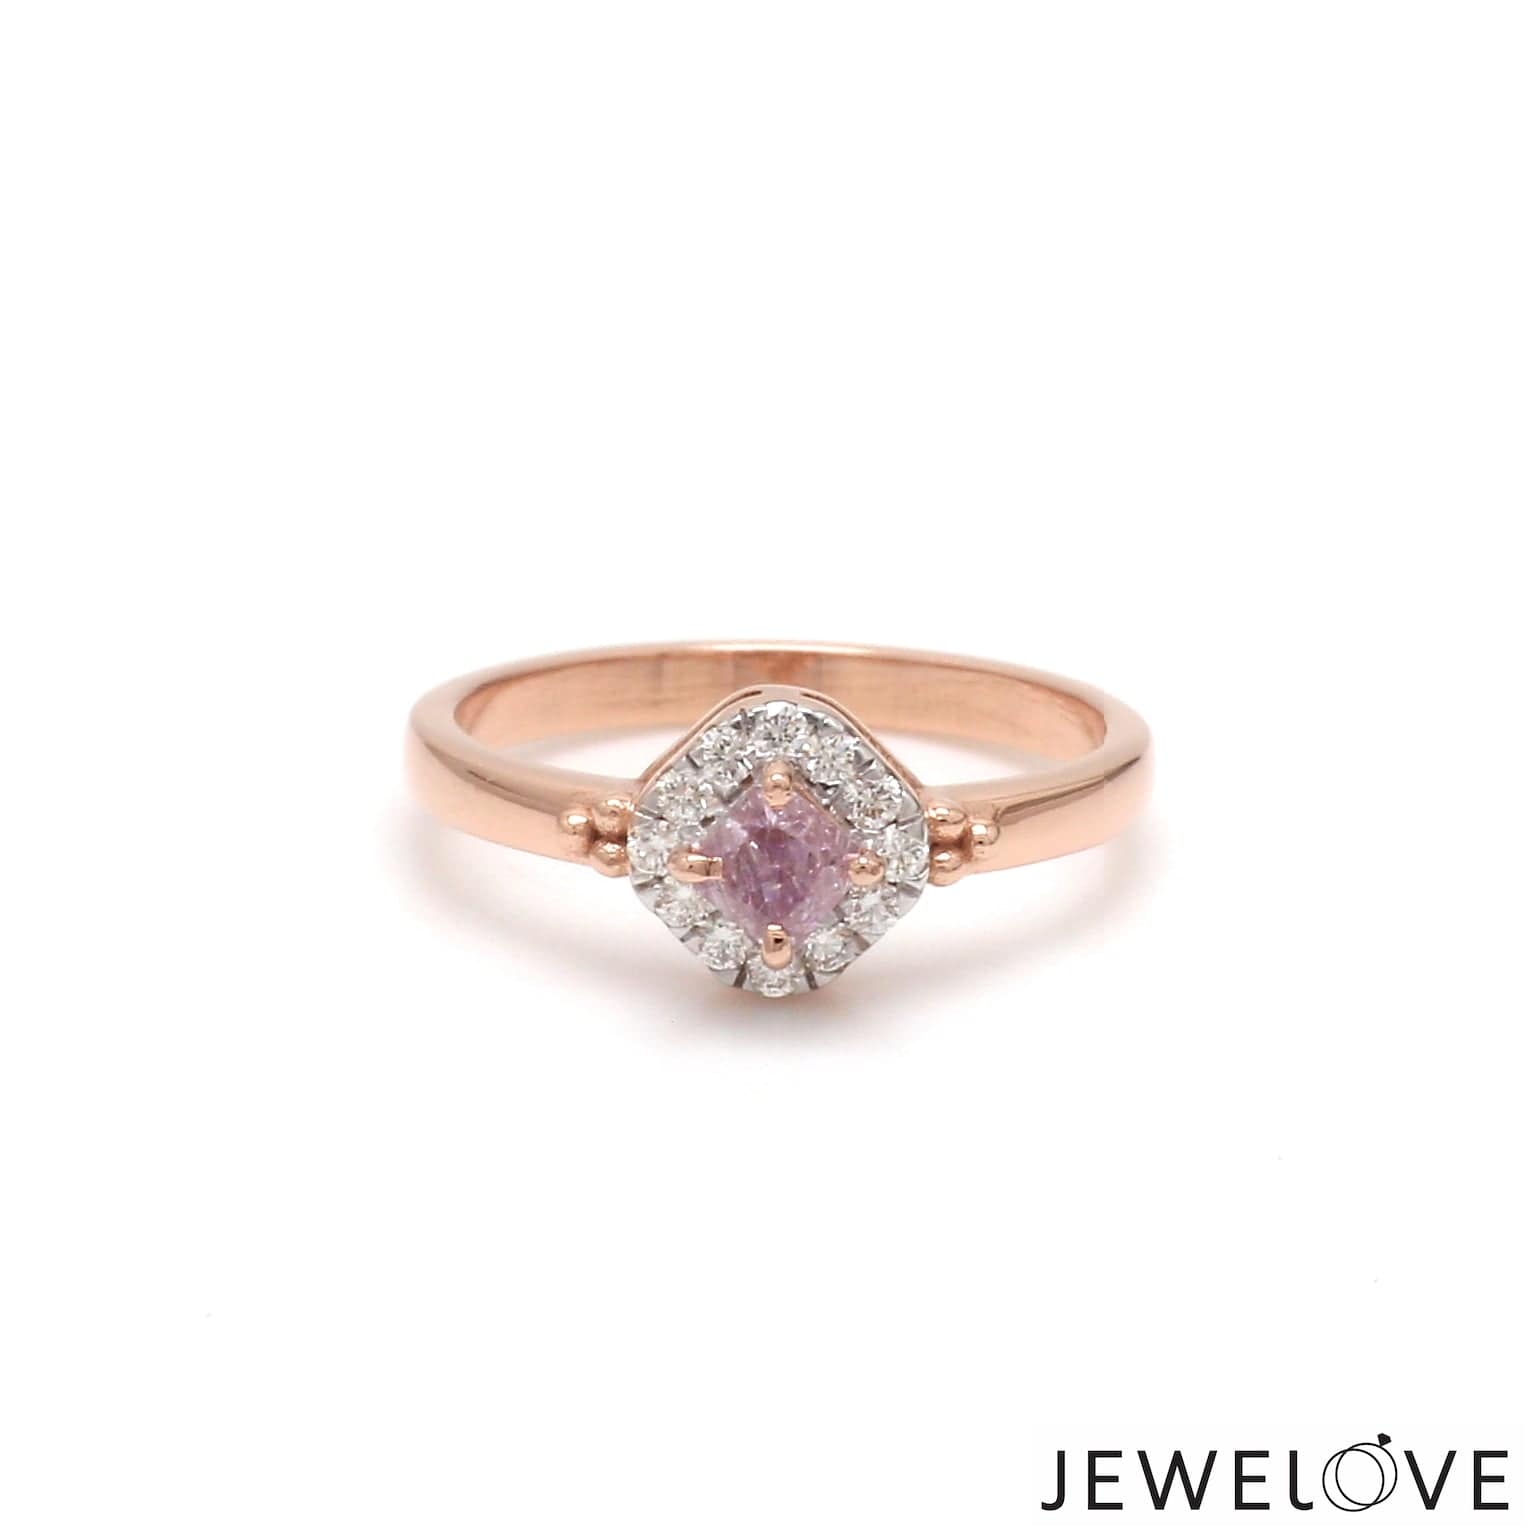 1.84 ctw Oval Light Pink Sapphire and Diamond Ring in 14k white gold  (SPR-101)